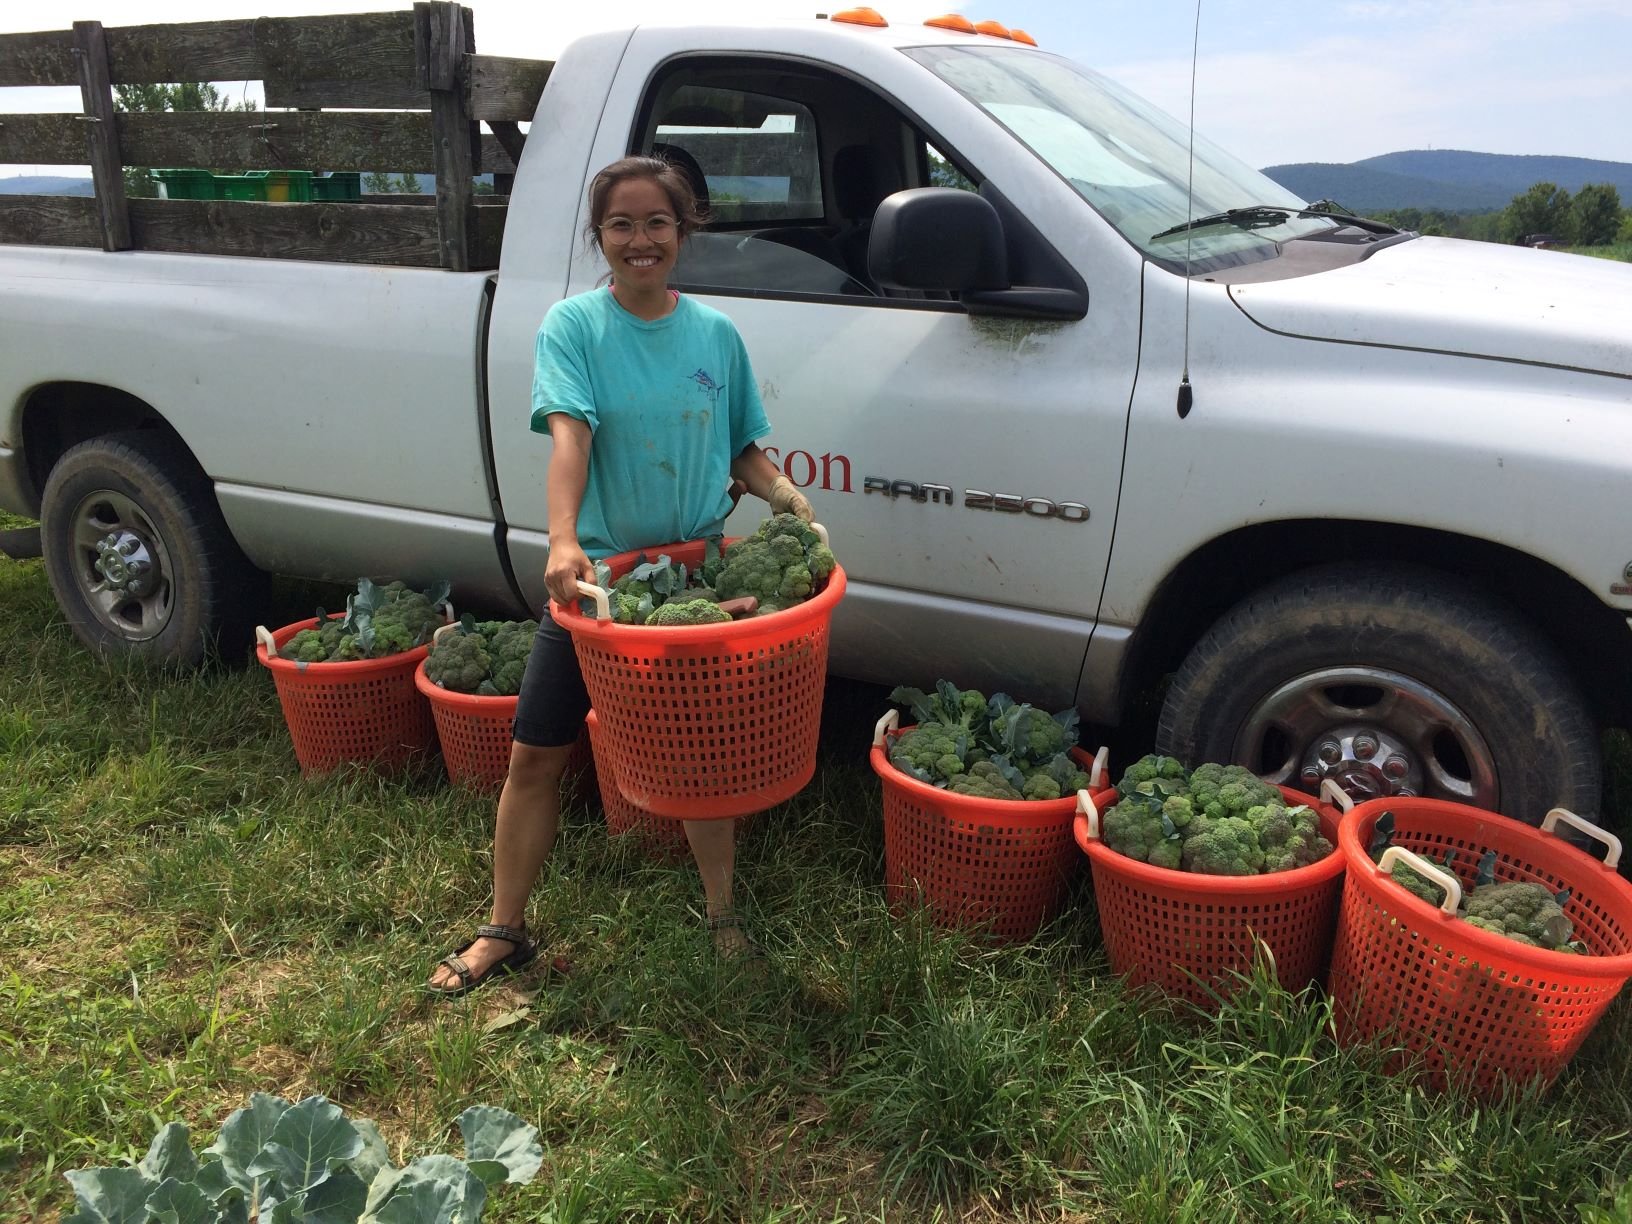 Next Happening: Tuesday CSA: Dickinson College Farm Field Notes for Week of July 1st!